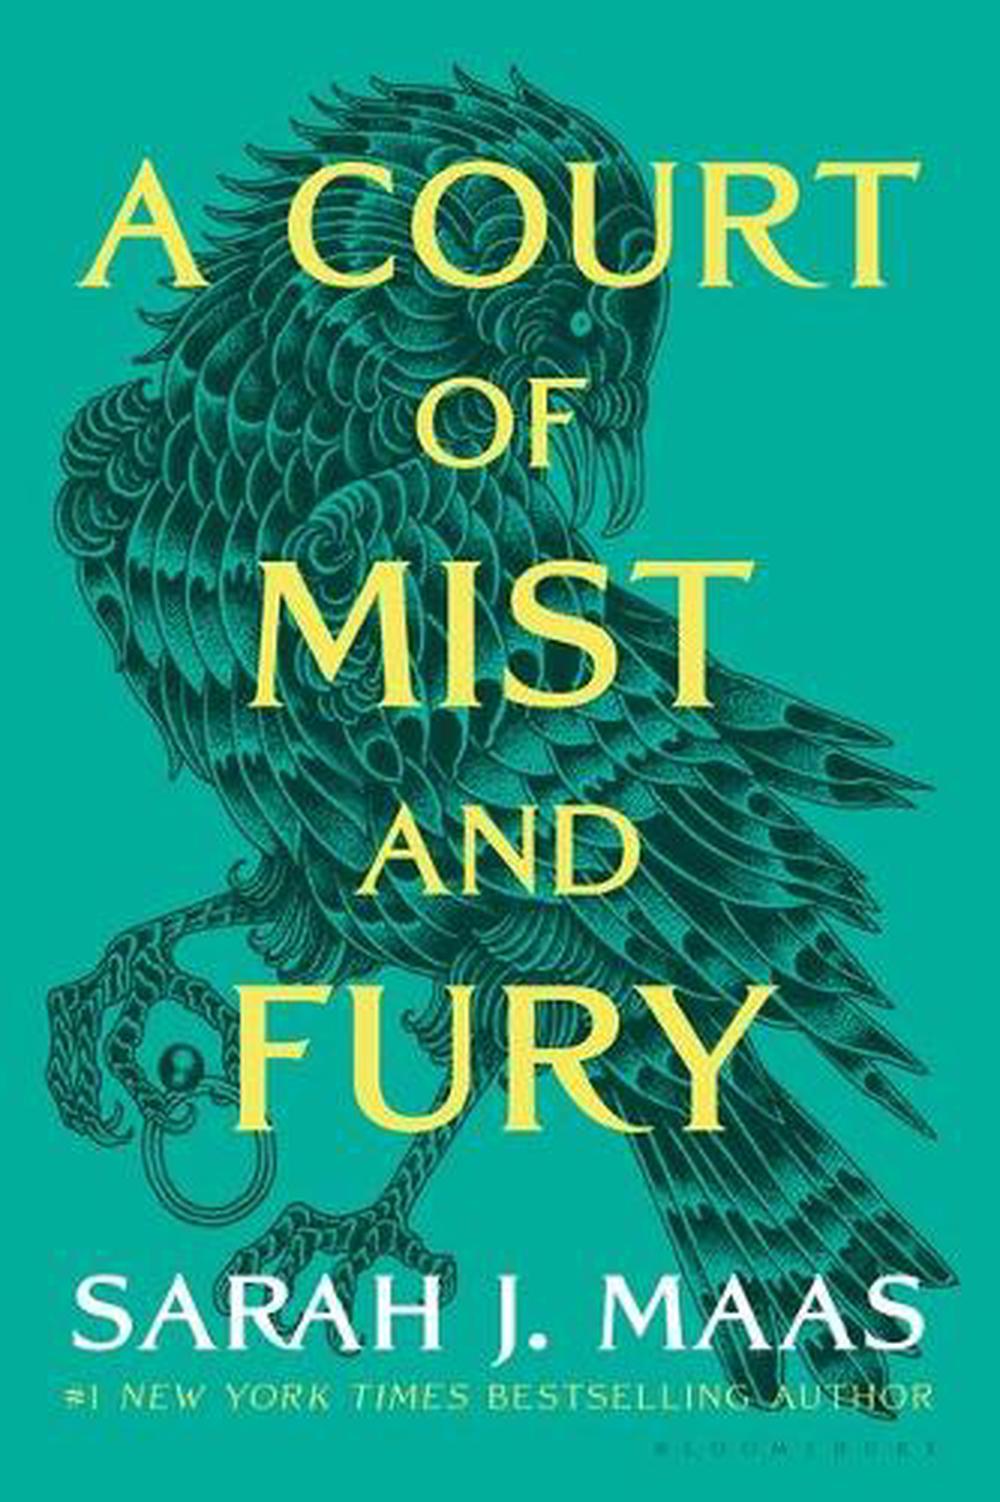 books like a court of mist and fury